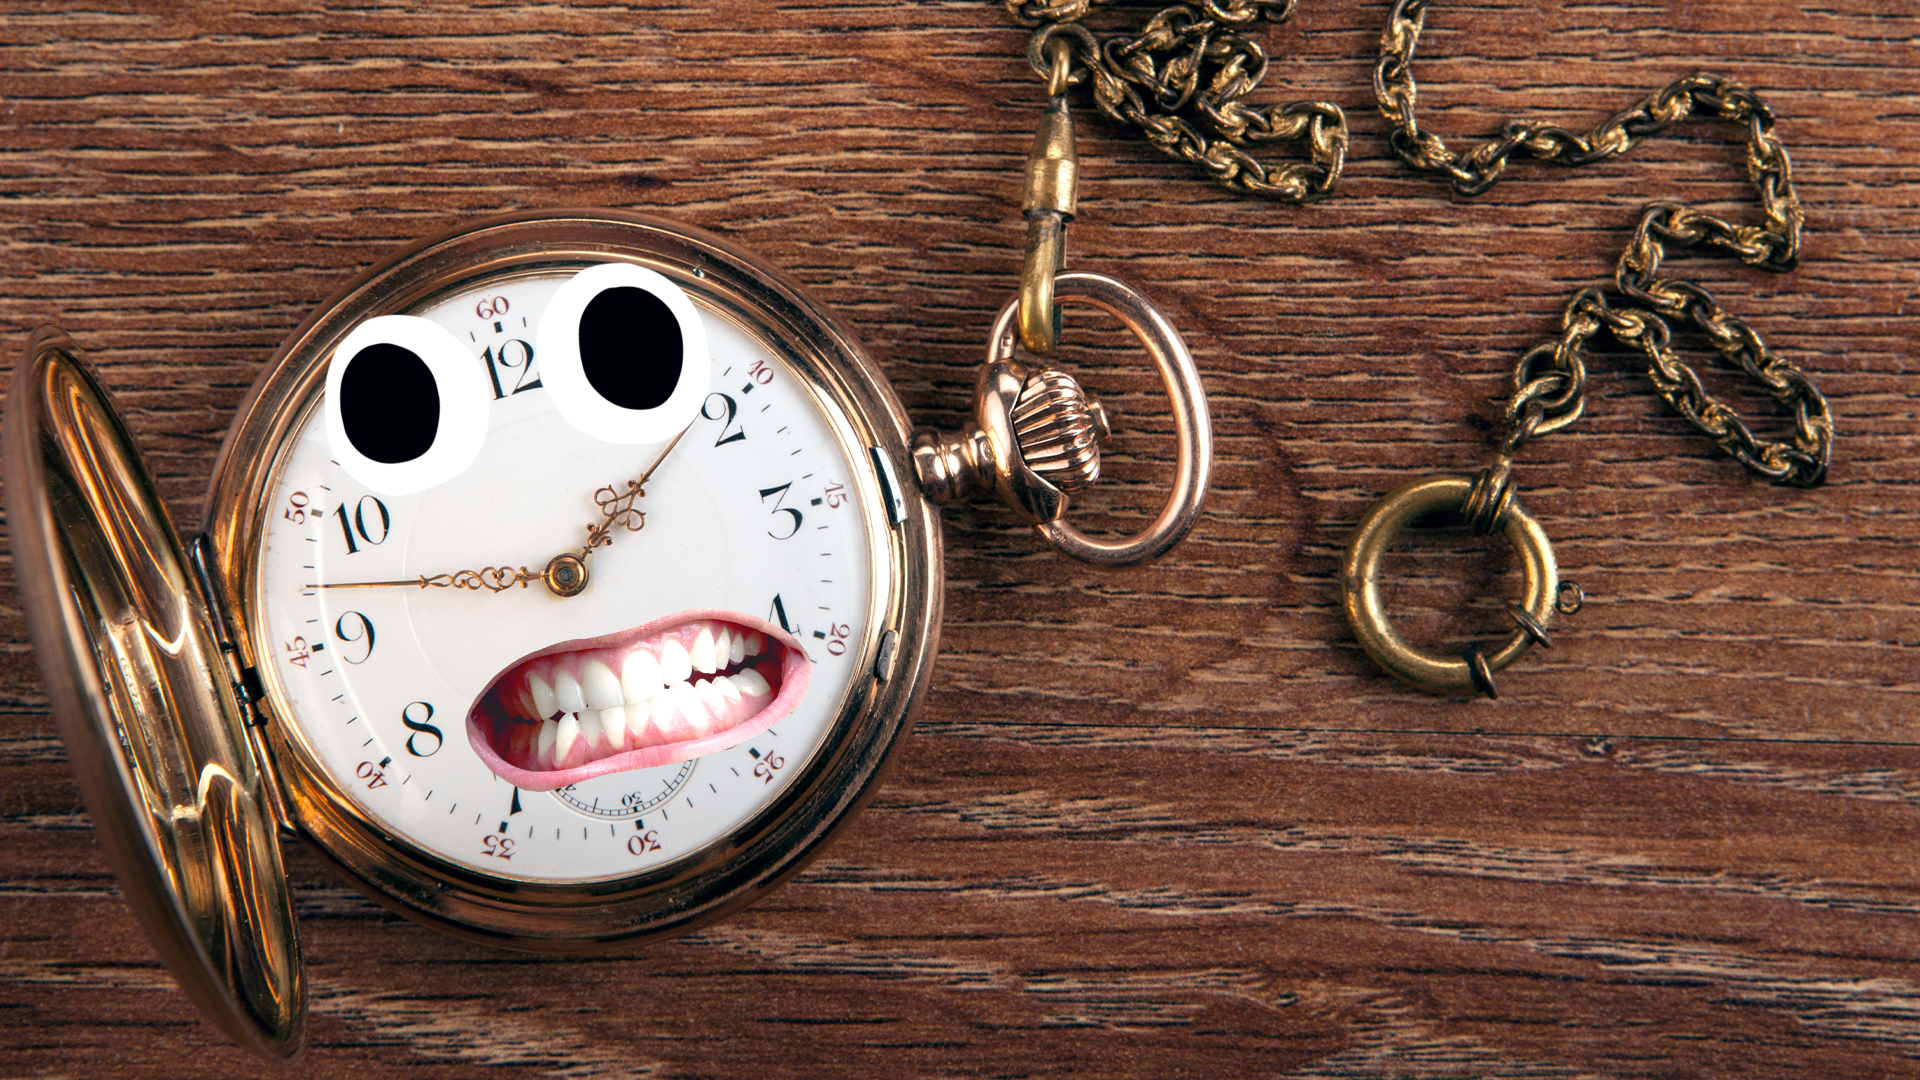 Pocket watch with derpy face